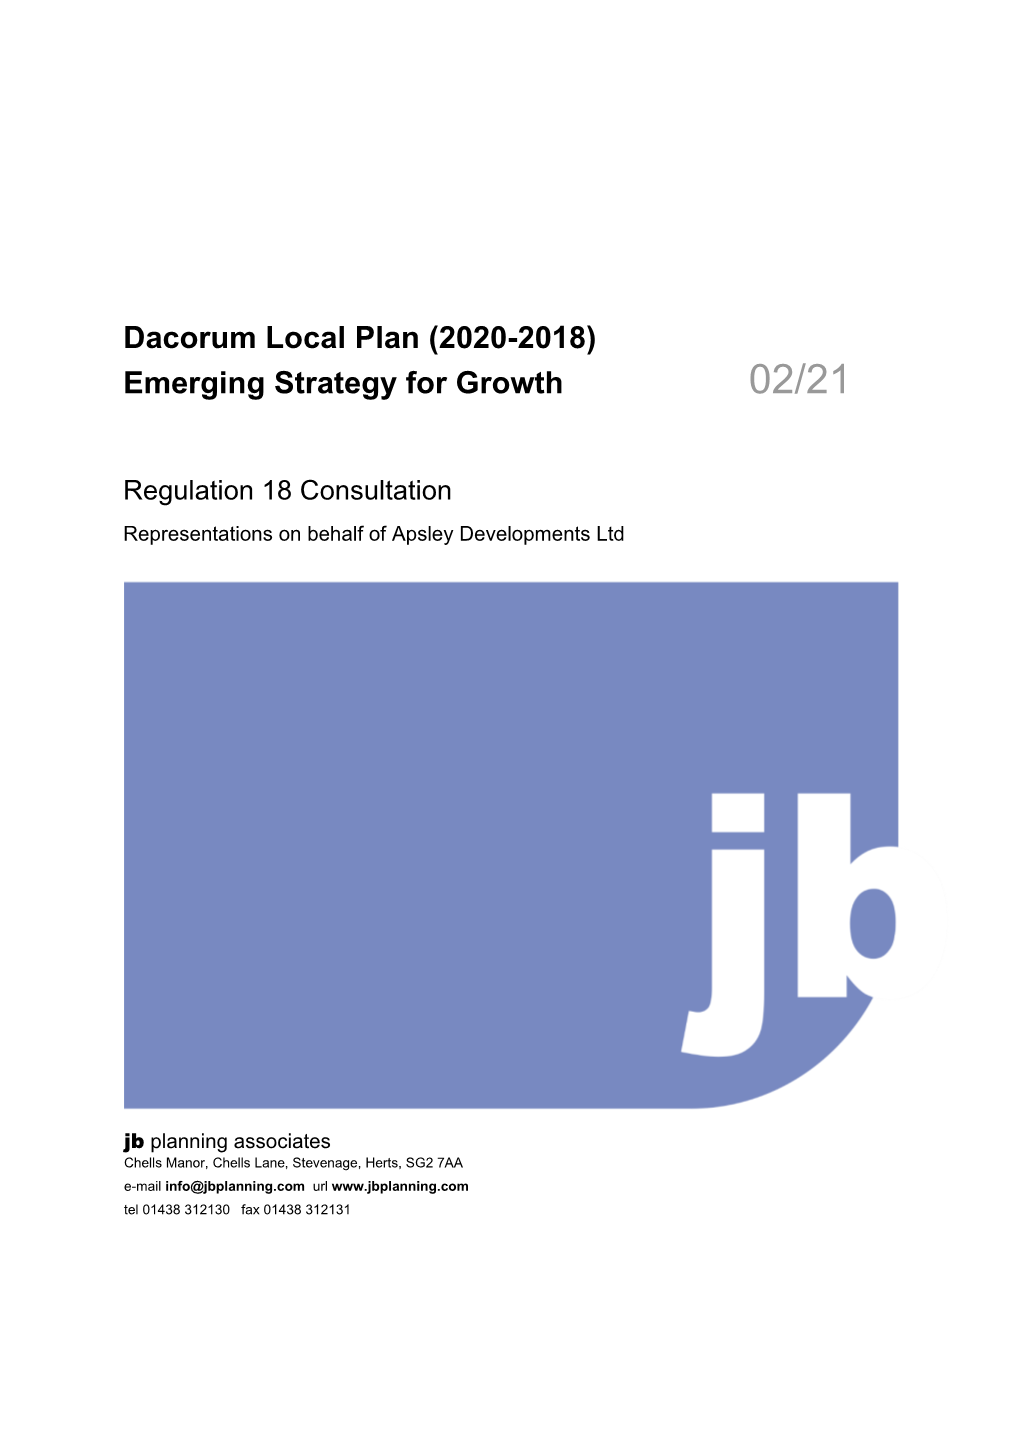 Emerging Strategy for Growth 02/21